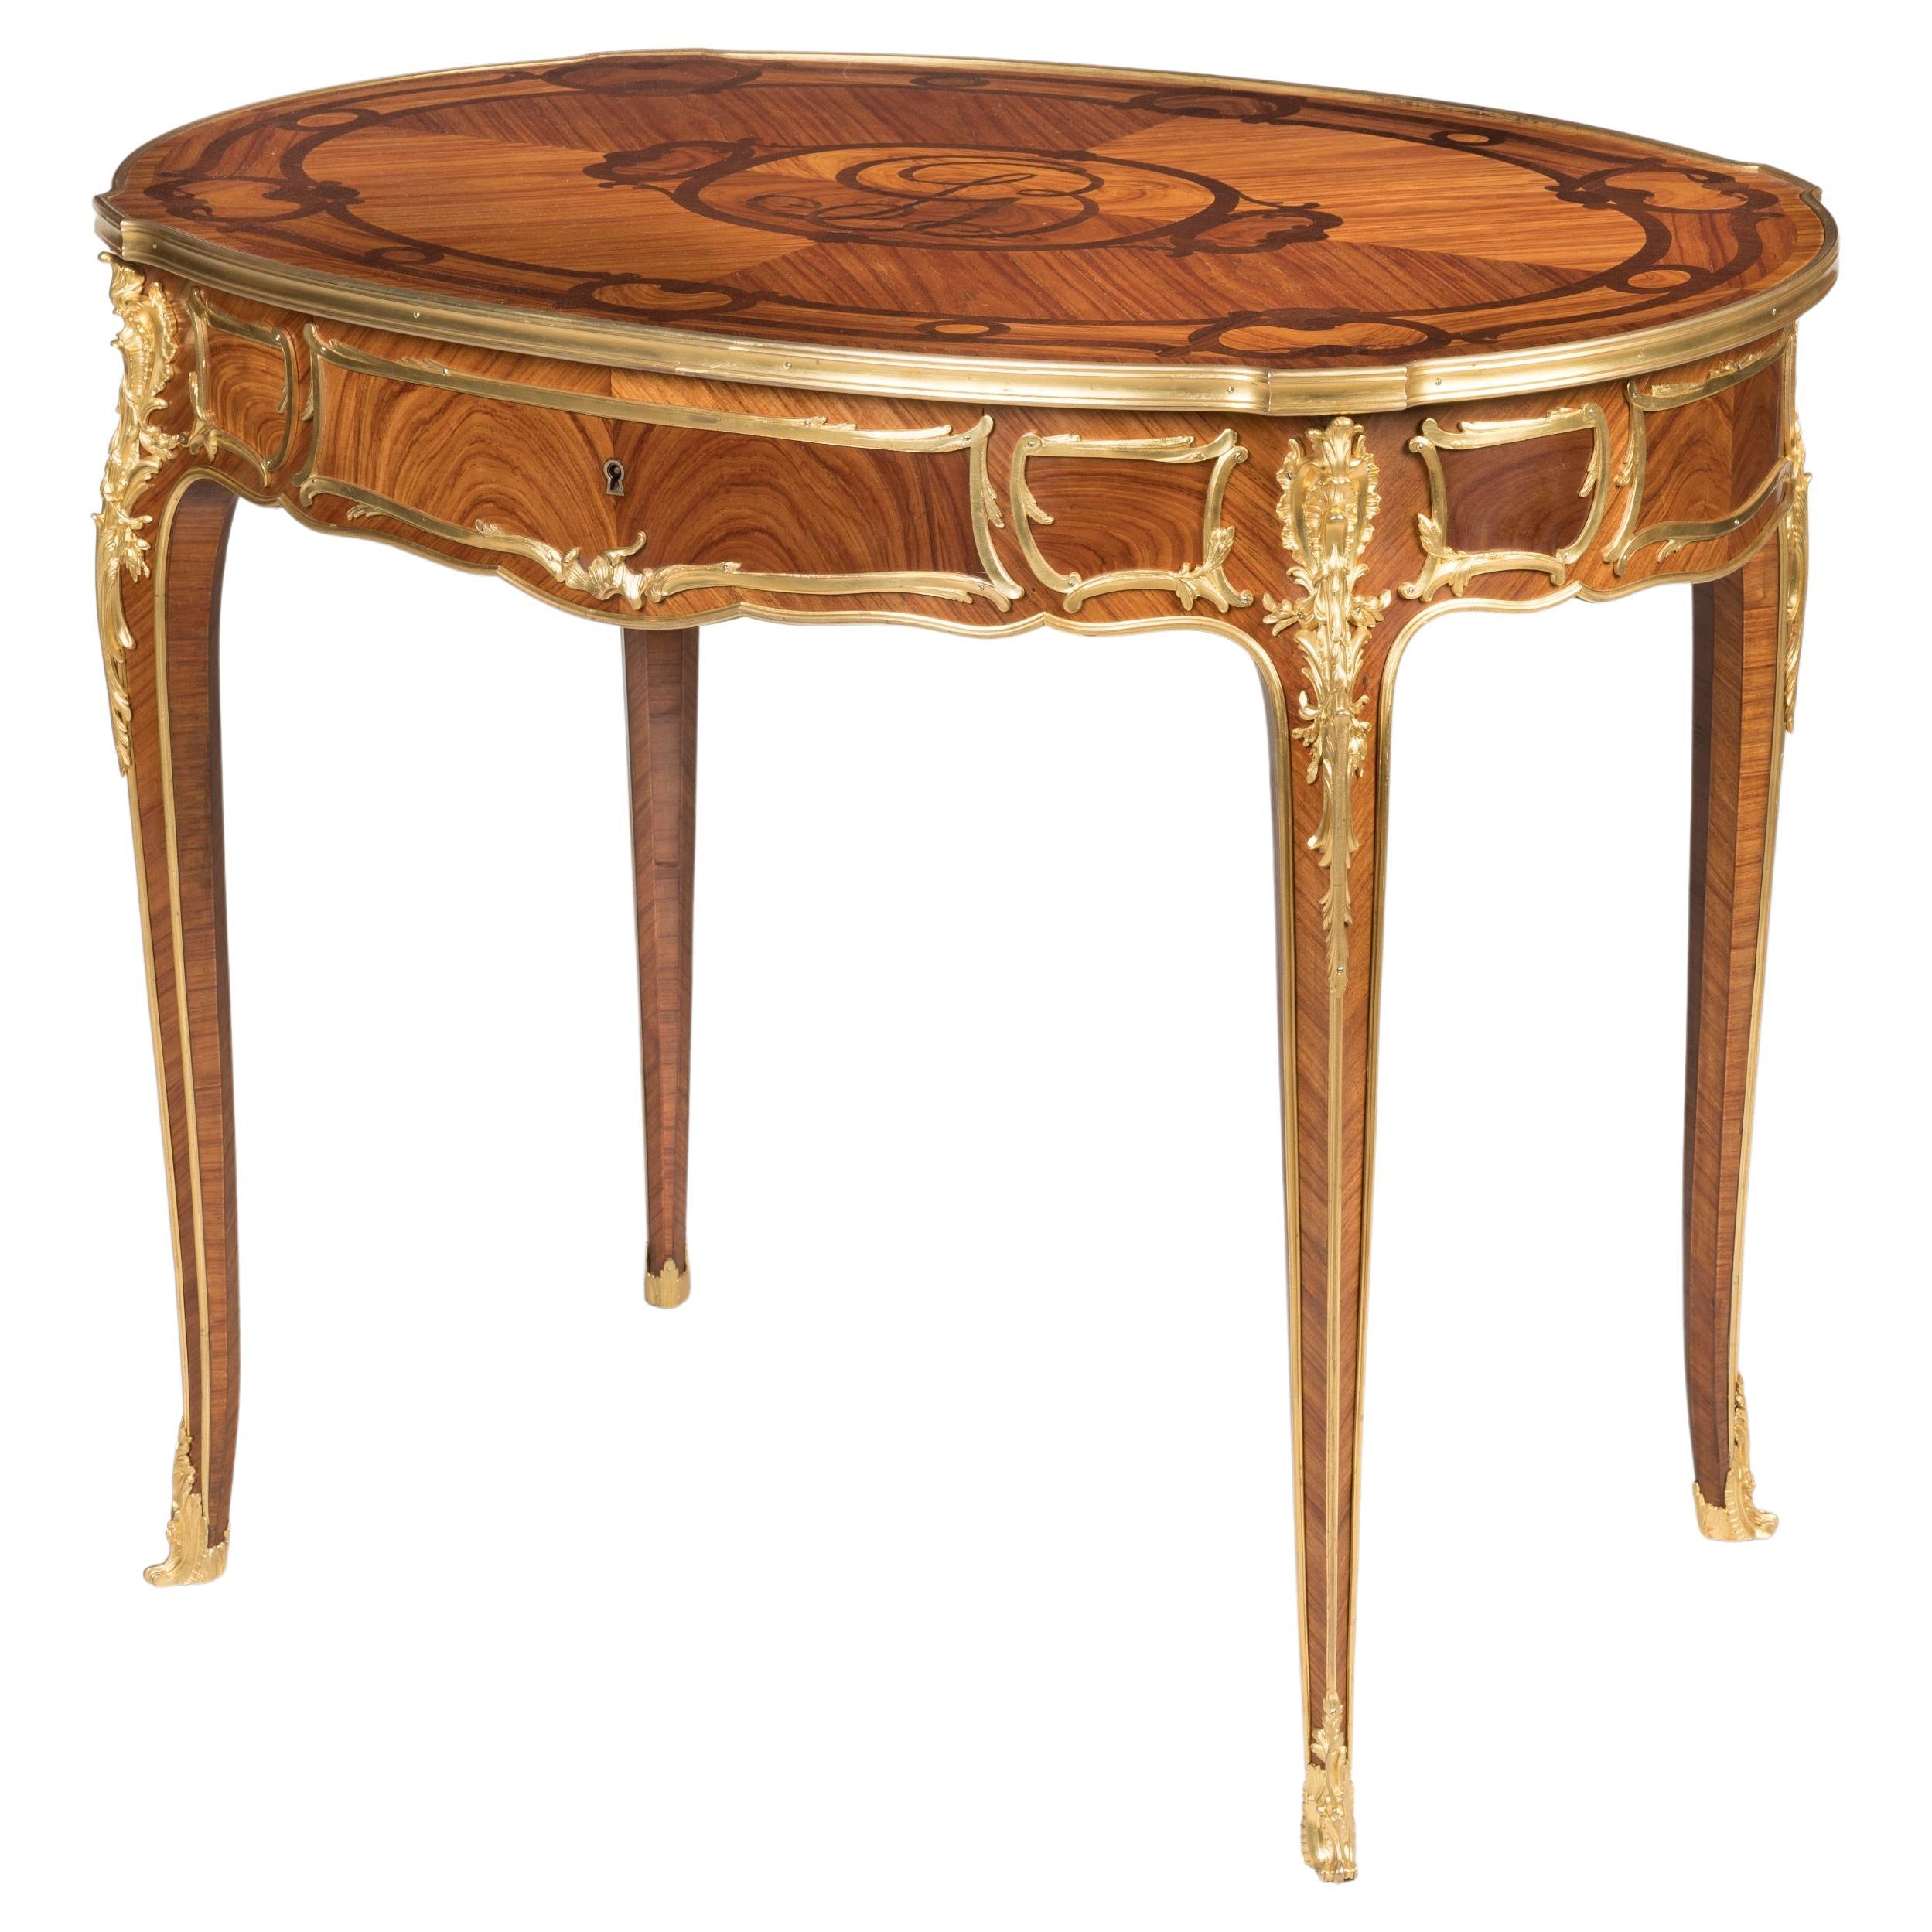 19th Century French Tulipwood Table in the Louis XVI Style For Sale